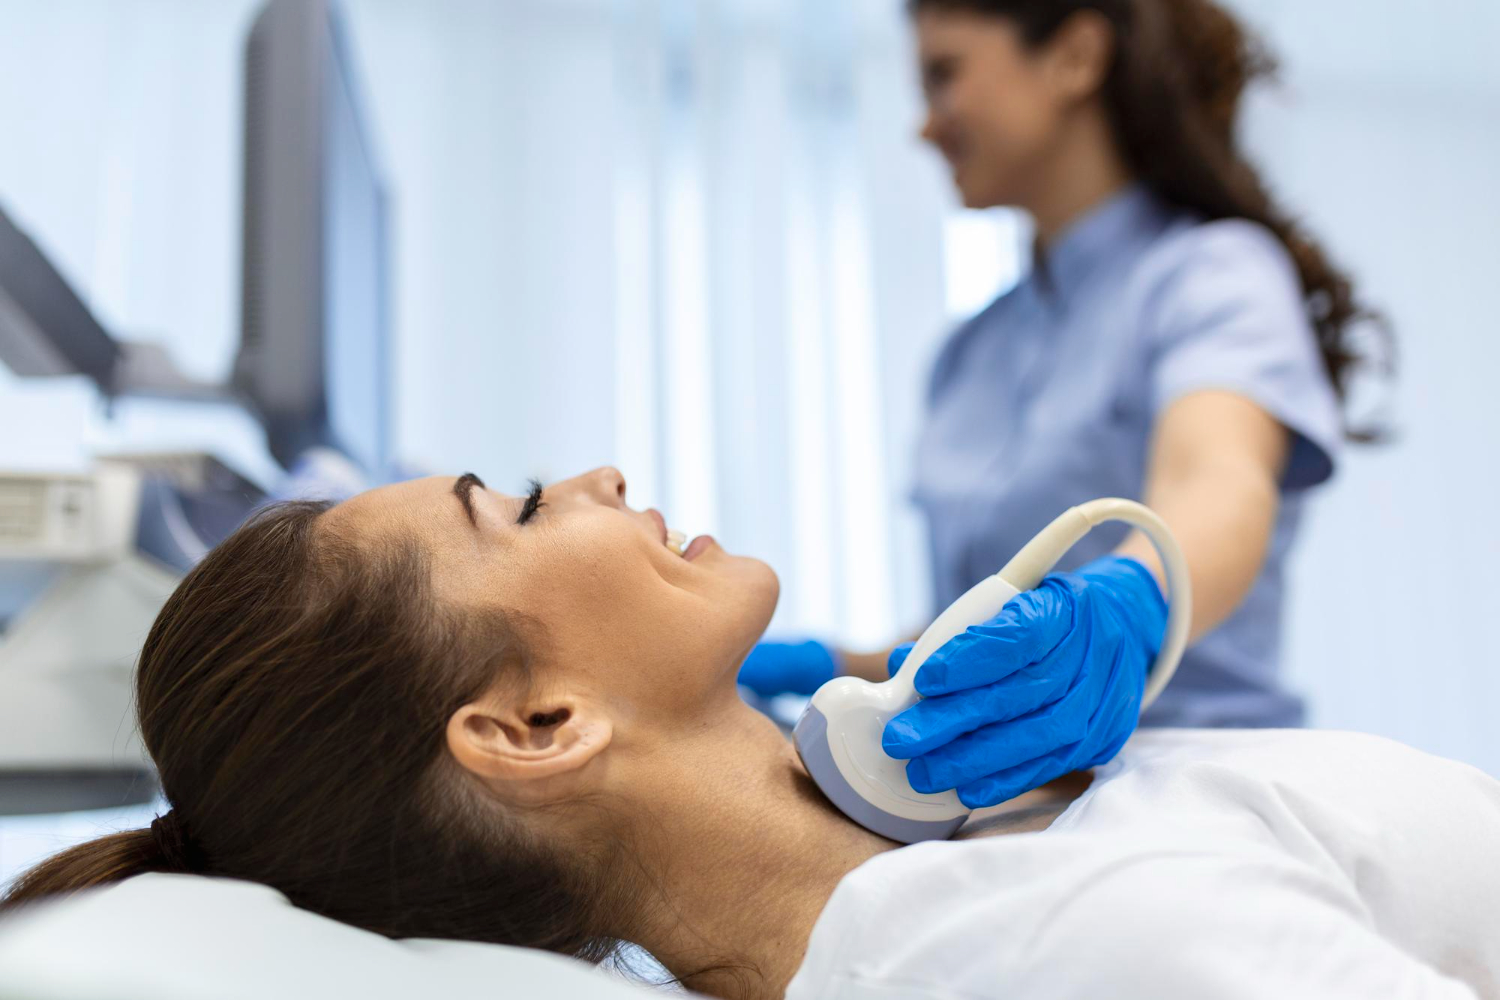 Better access to diagnostic tests raises incidence of thyroid cancer in more affluent areas